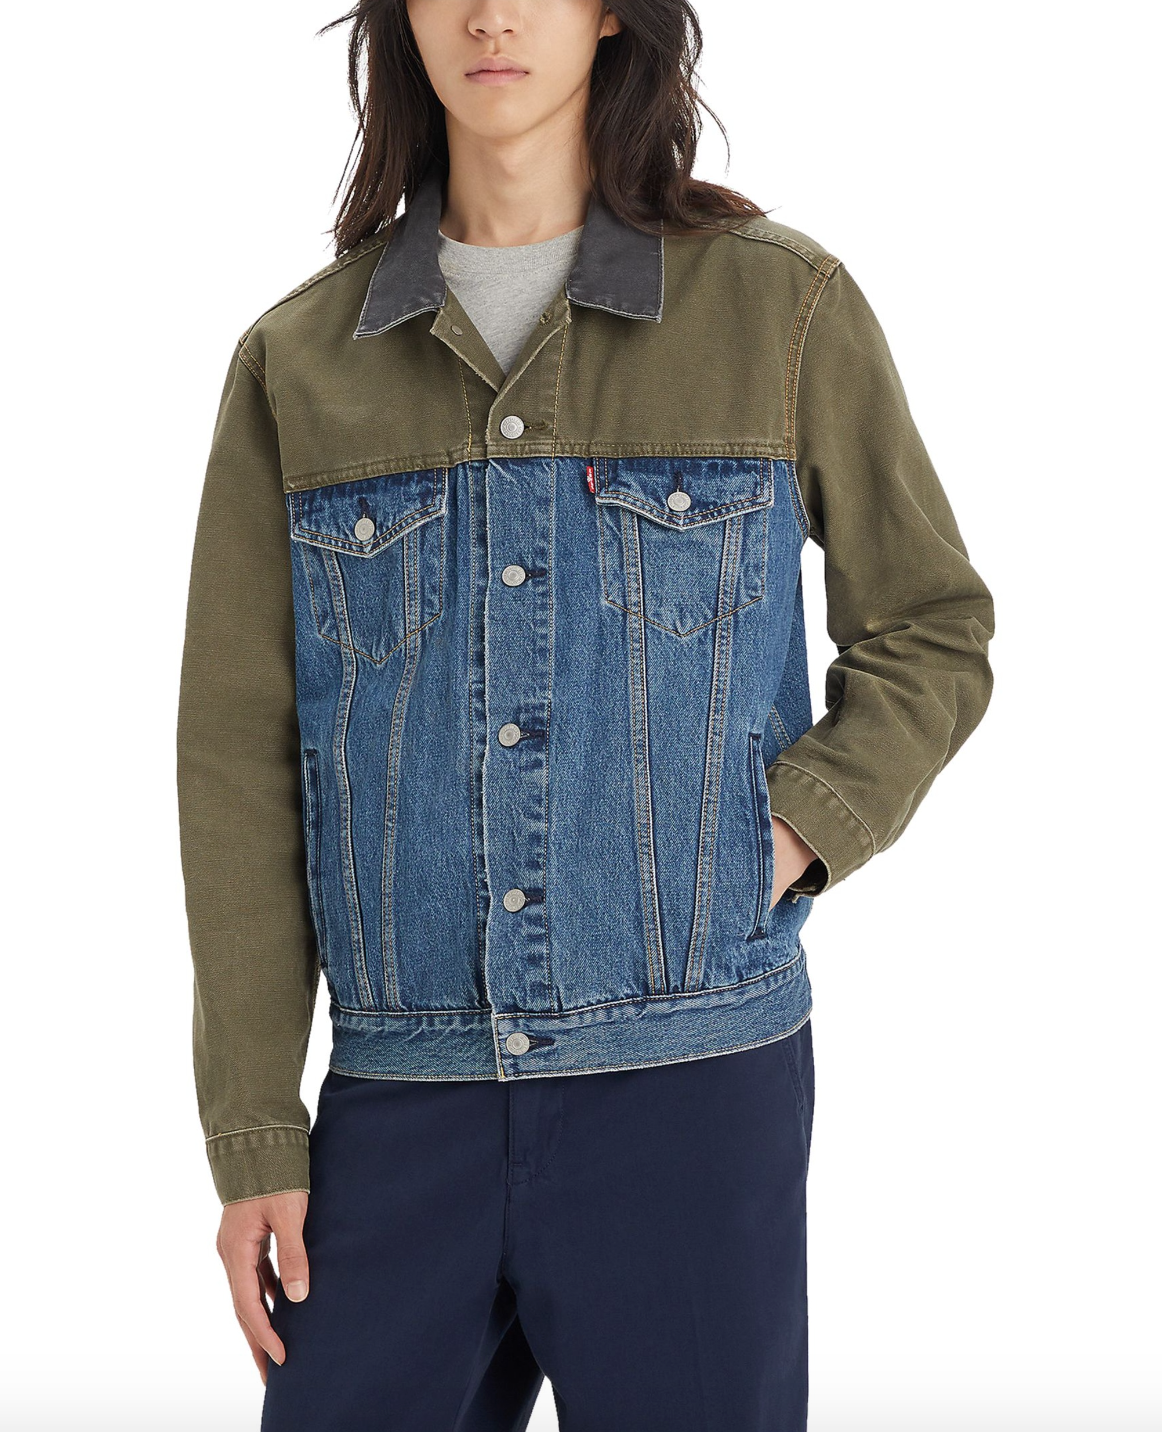 Levi's- The Trucker Jacket Levels to This